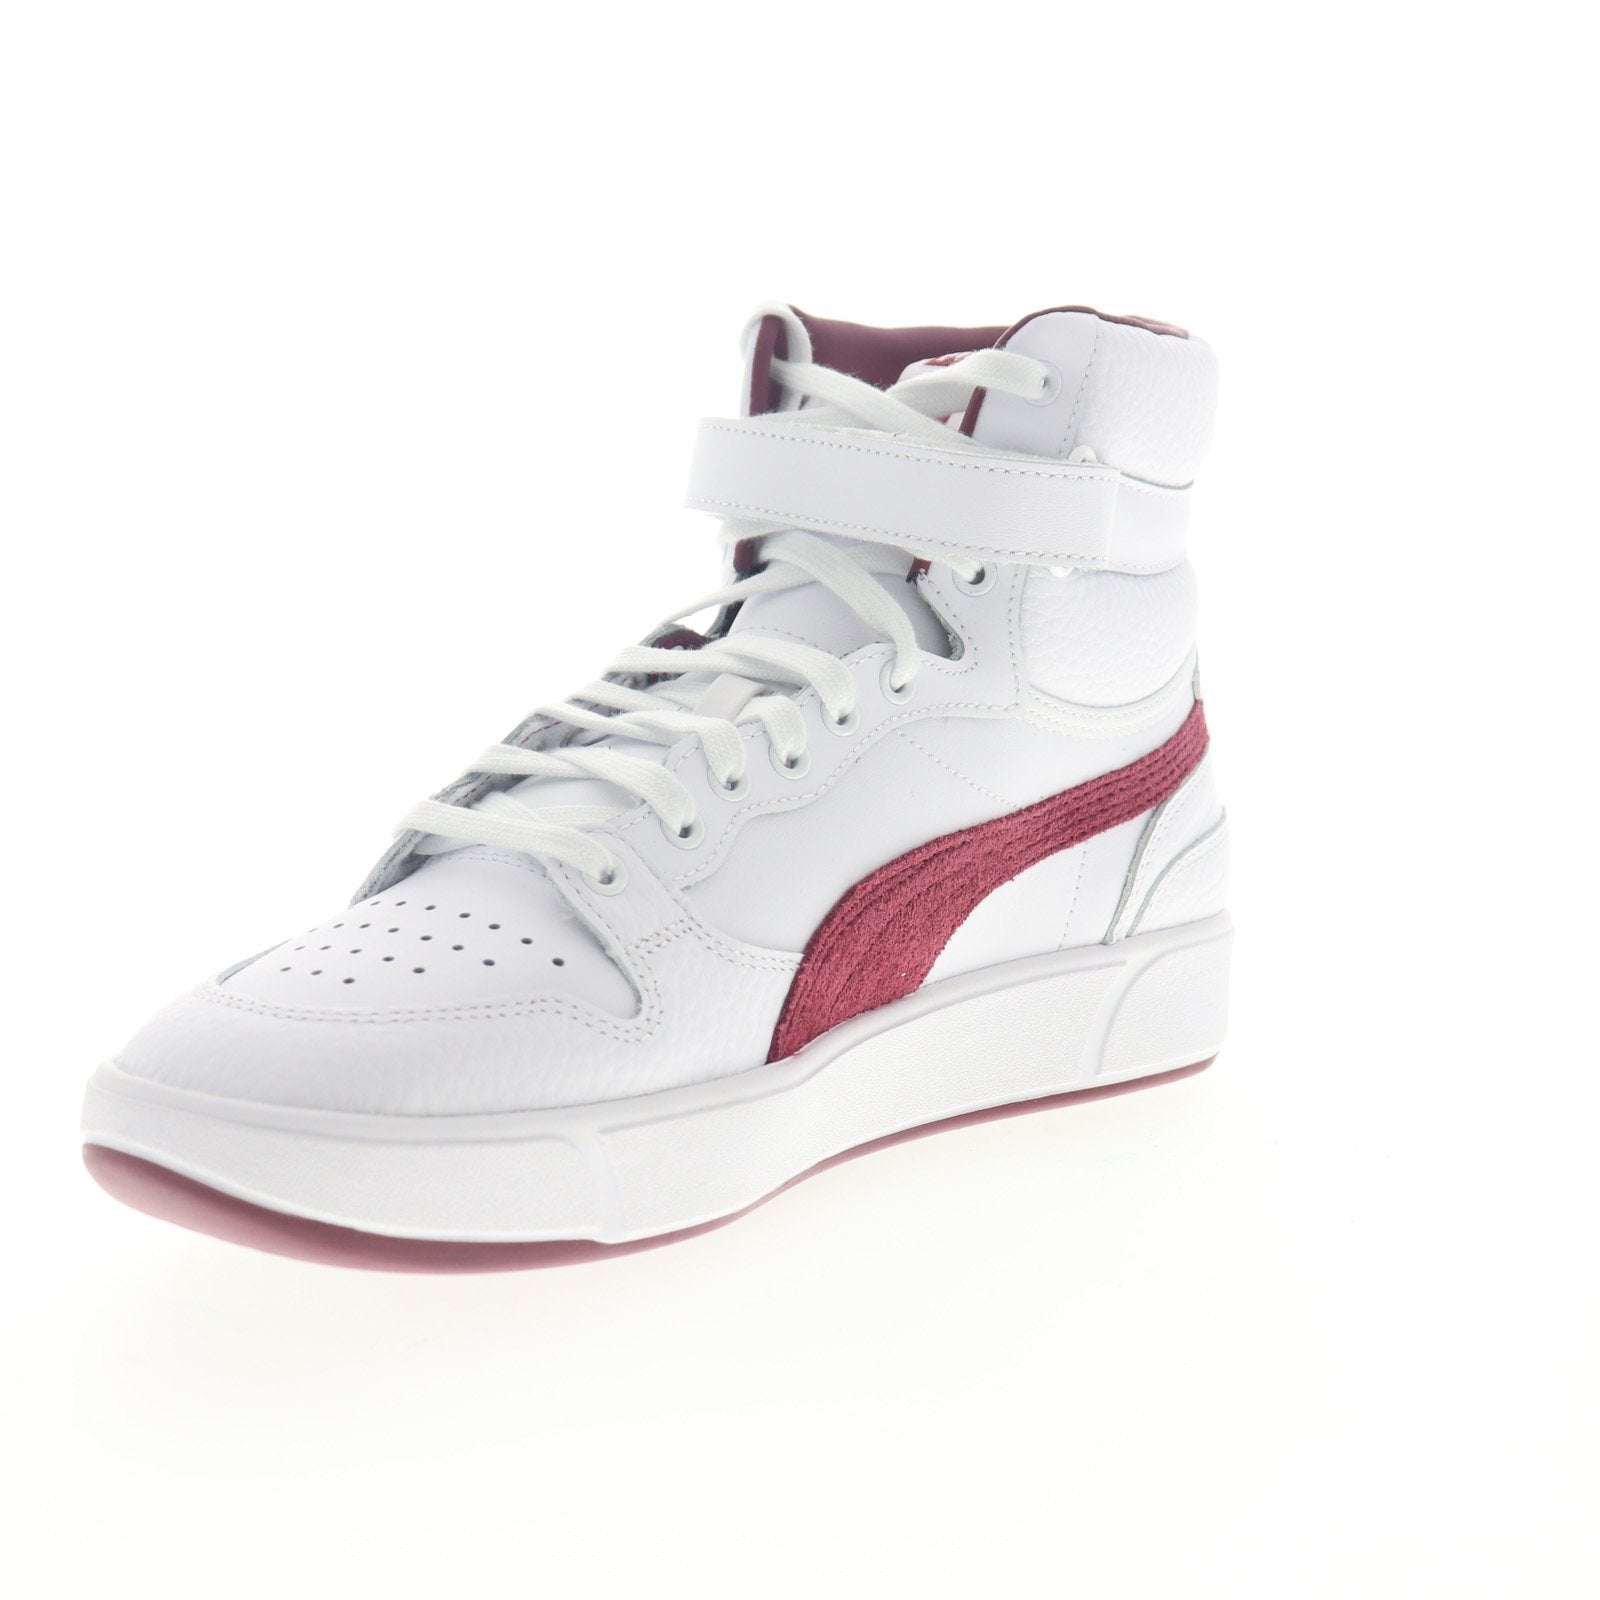 Puma Sky Lx Def Jam 37453601 Mens White Leather High Top Lace Up 